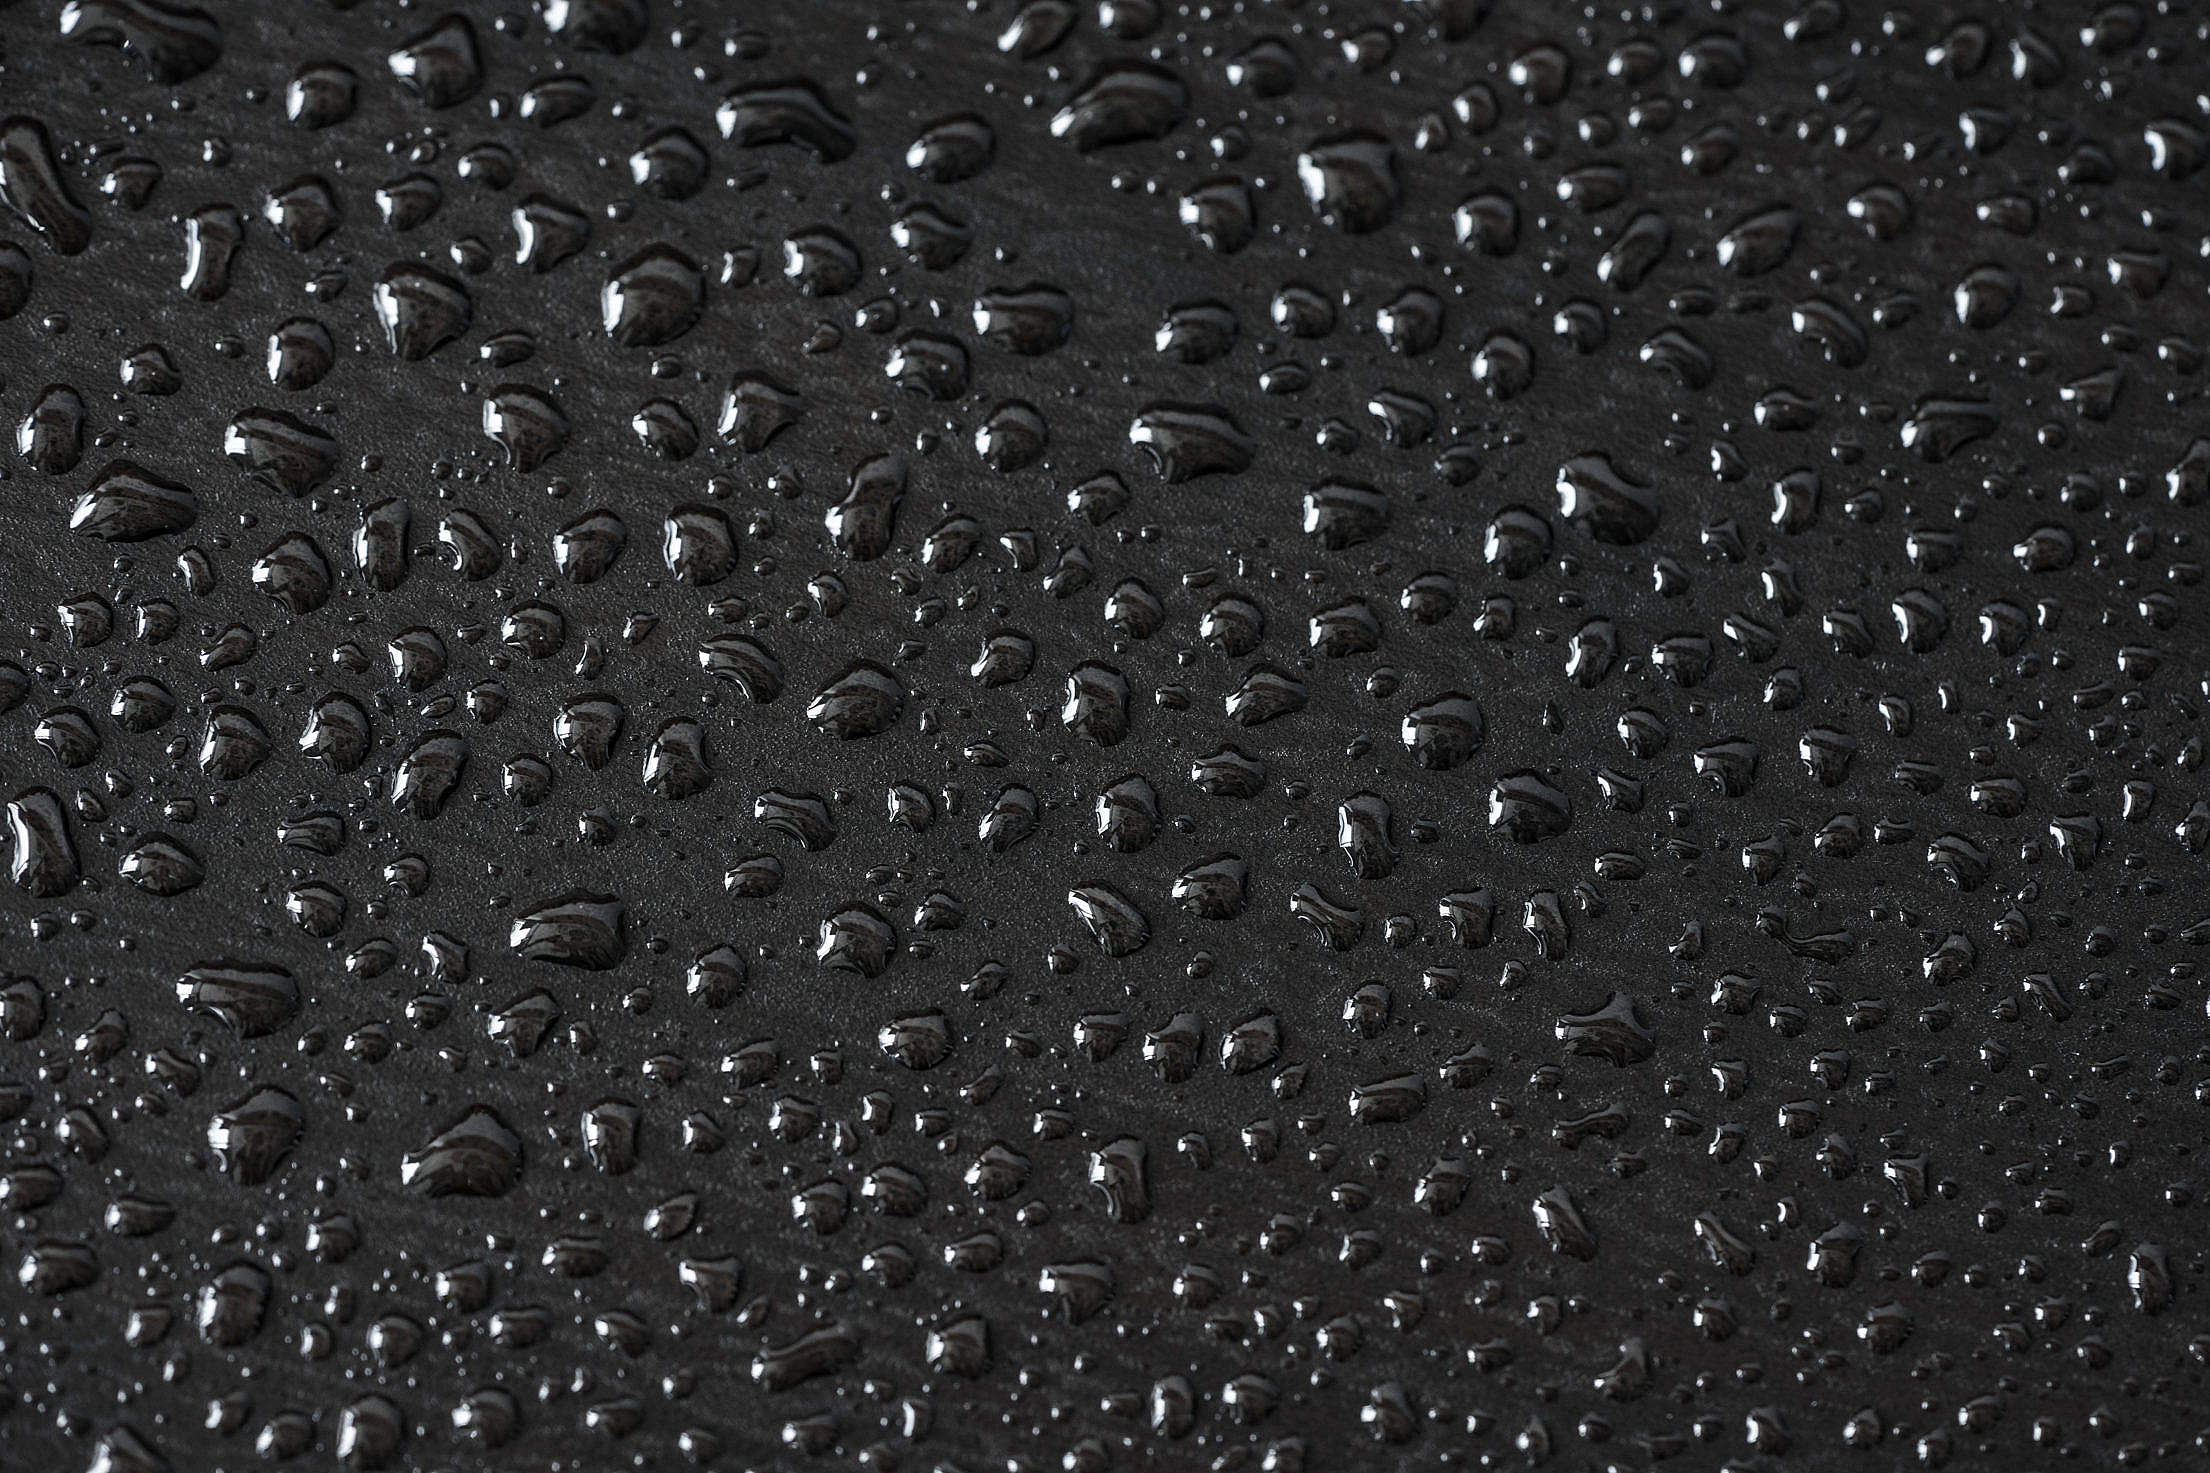 Black Water Drops Abstract Background Pattern Free Stock Photo ...